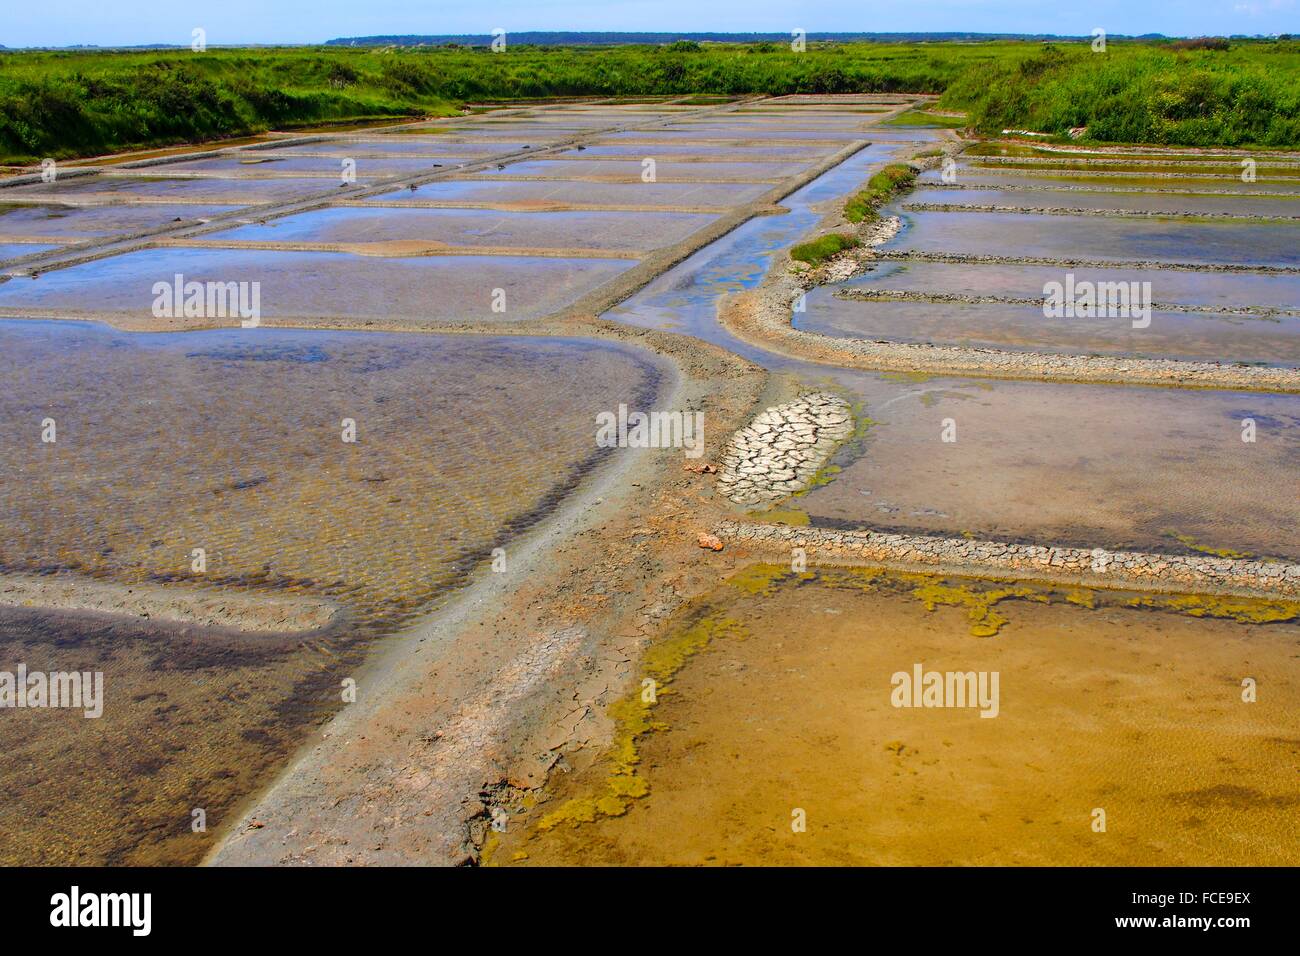 France-Loire Atlantique- Guerande.the 'Pays Blanc' (White Land), because of its salt marshes Stock Photo